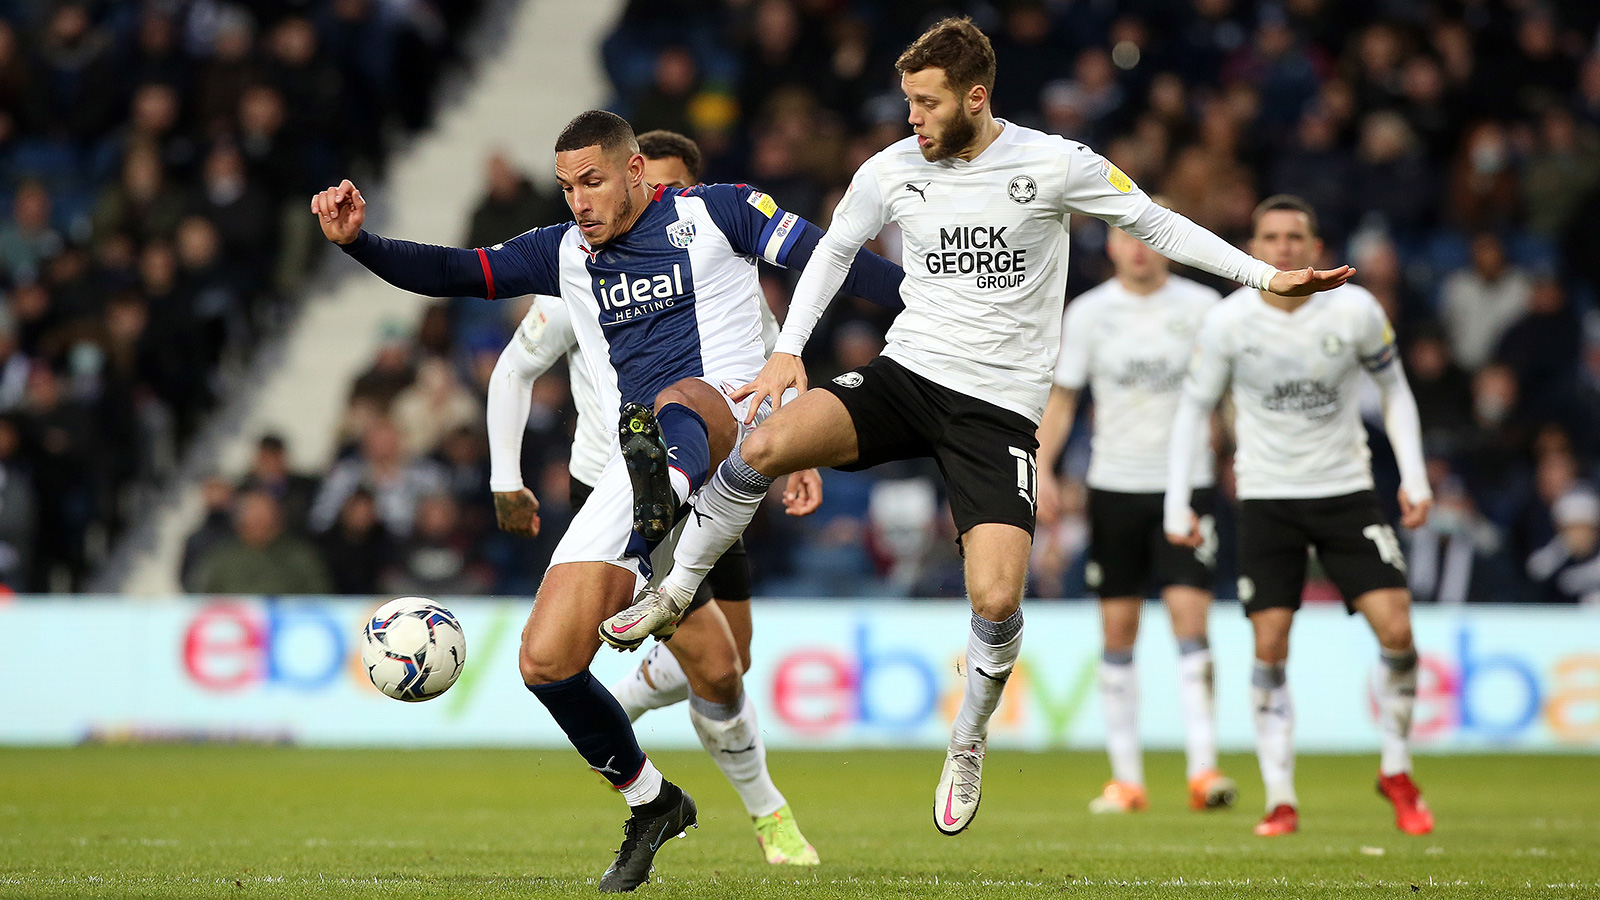 Jorge Grant in action against West Brom